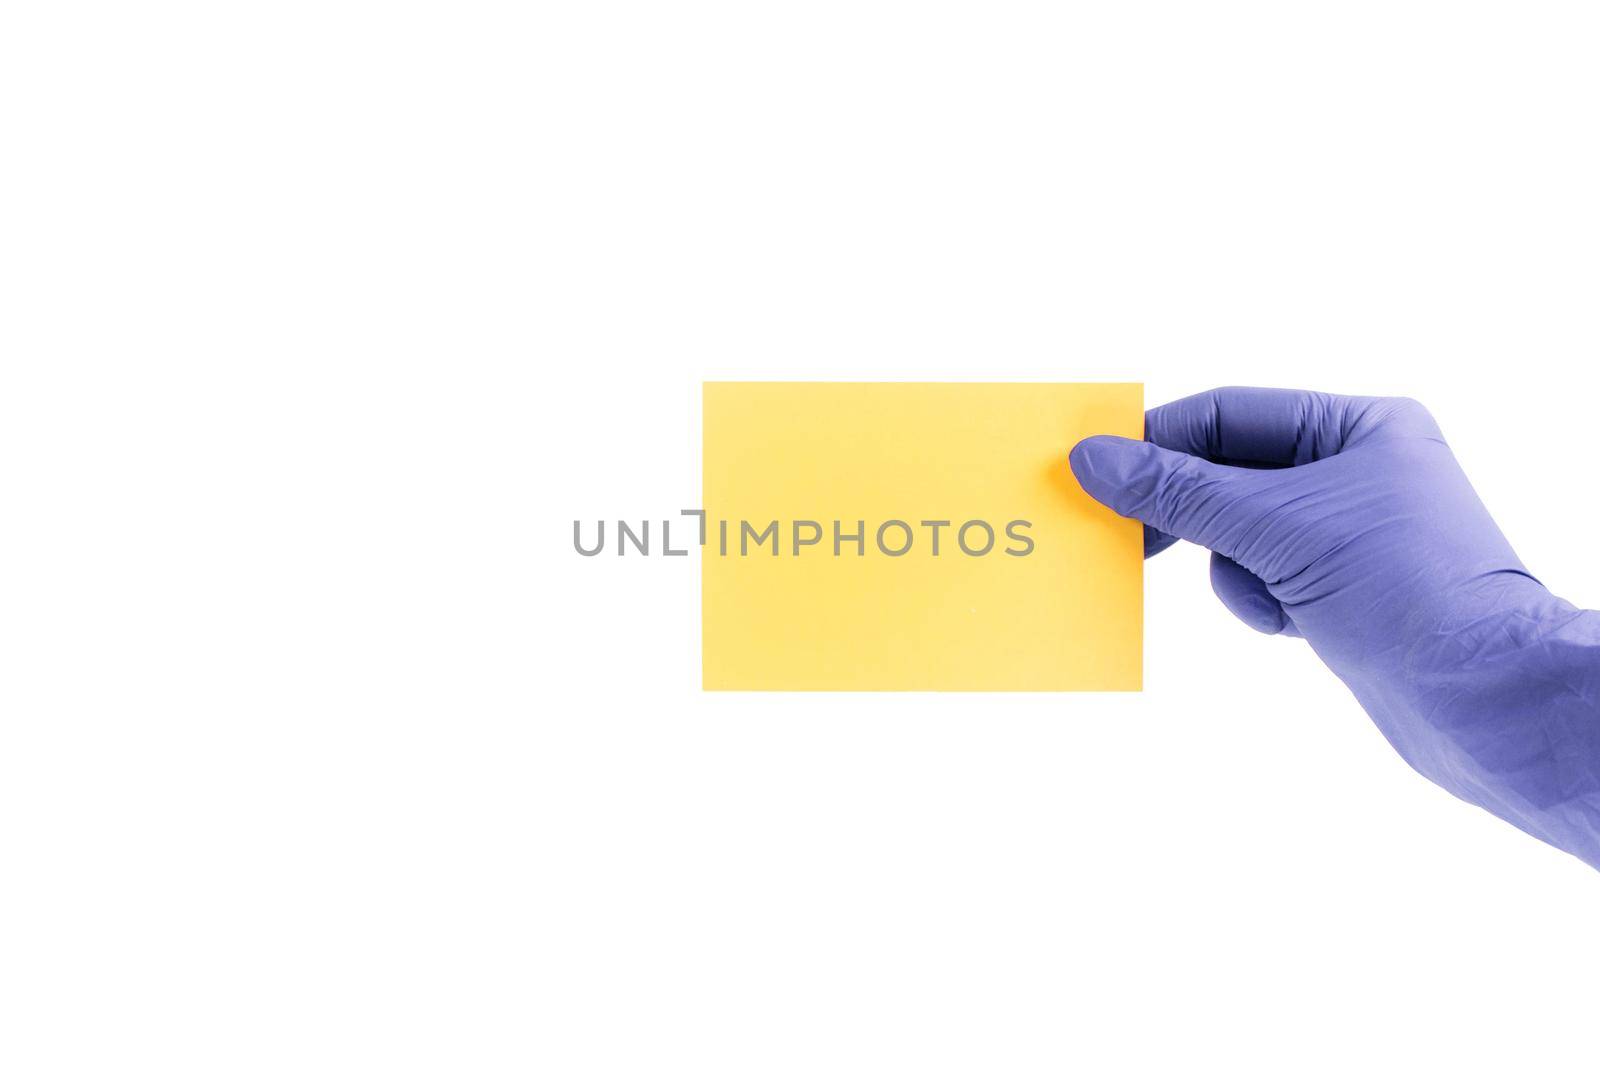 Women's hands i medical gloves hold swatches of the trendy color - illuminating yellow. Selection of year 2021 colors for design of clothes, interiors, websites and publications. by JuliaDorian